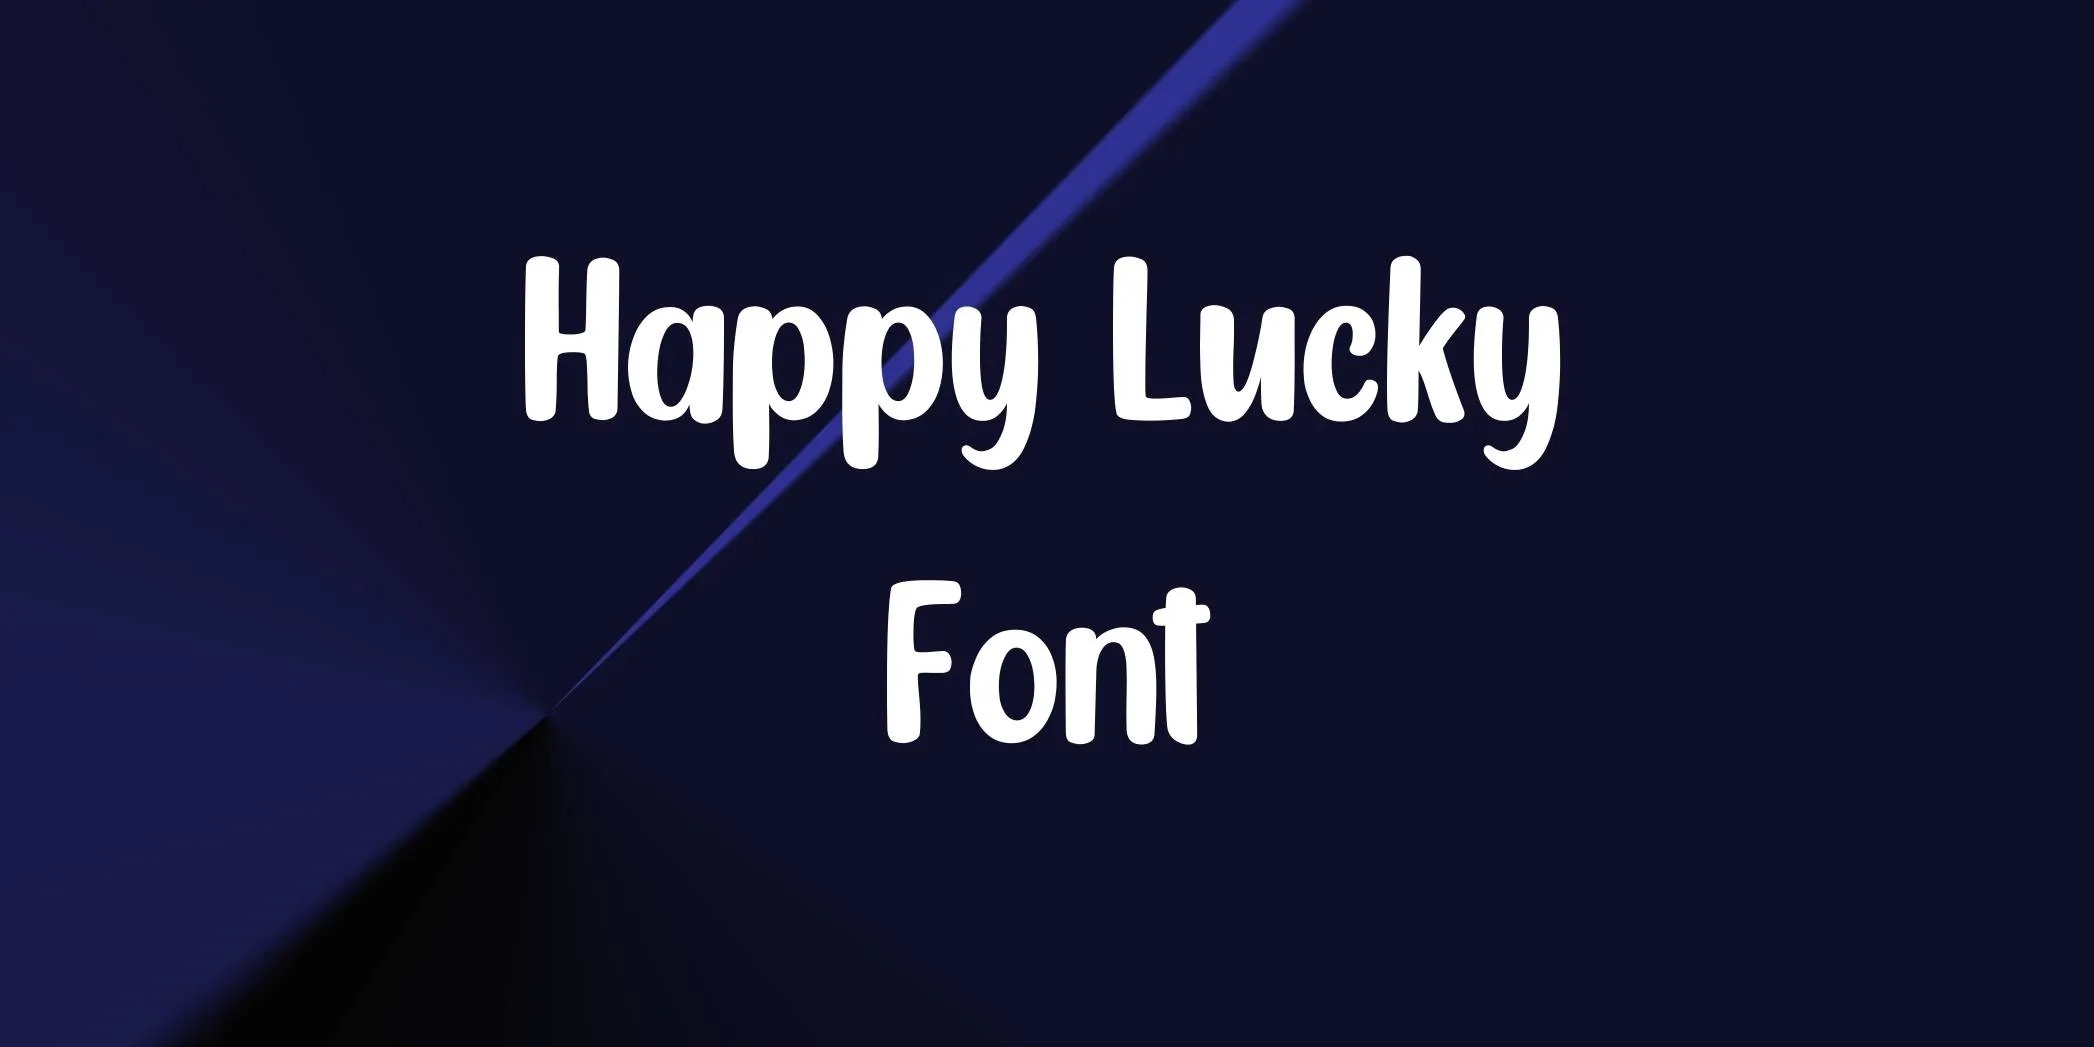 Happy Lucky Font Free Download